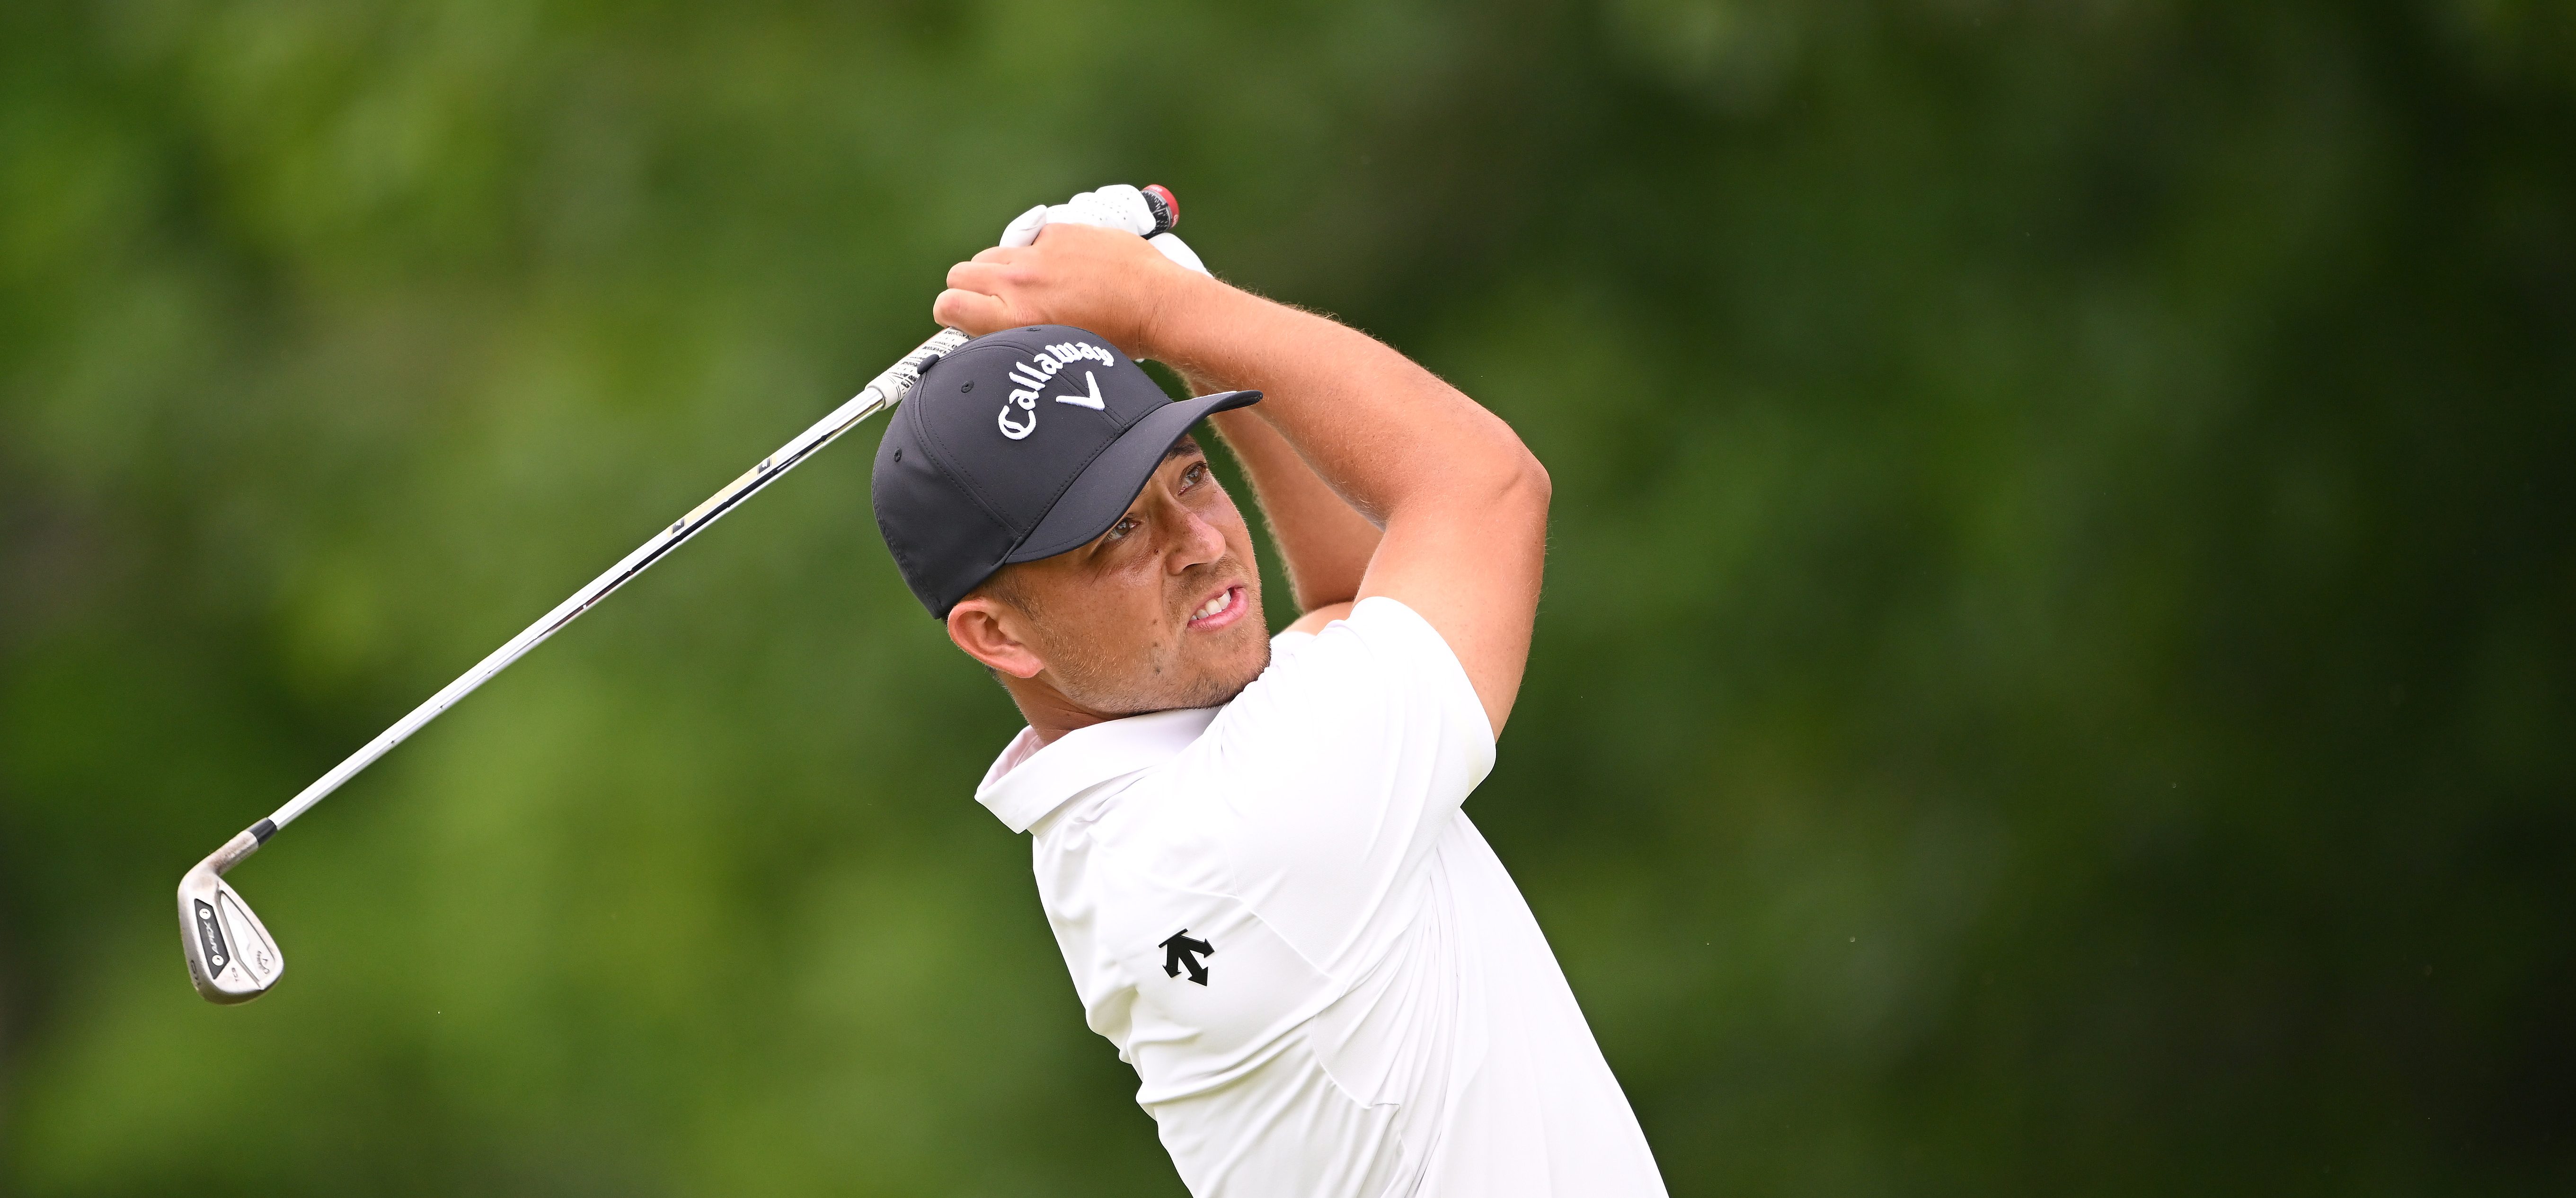 Xander Schauffele gets another major scoring record, sets pace at PGA
Championship